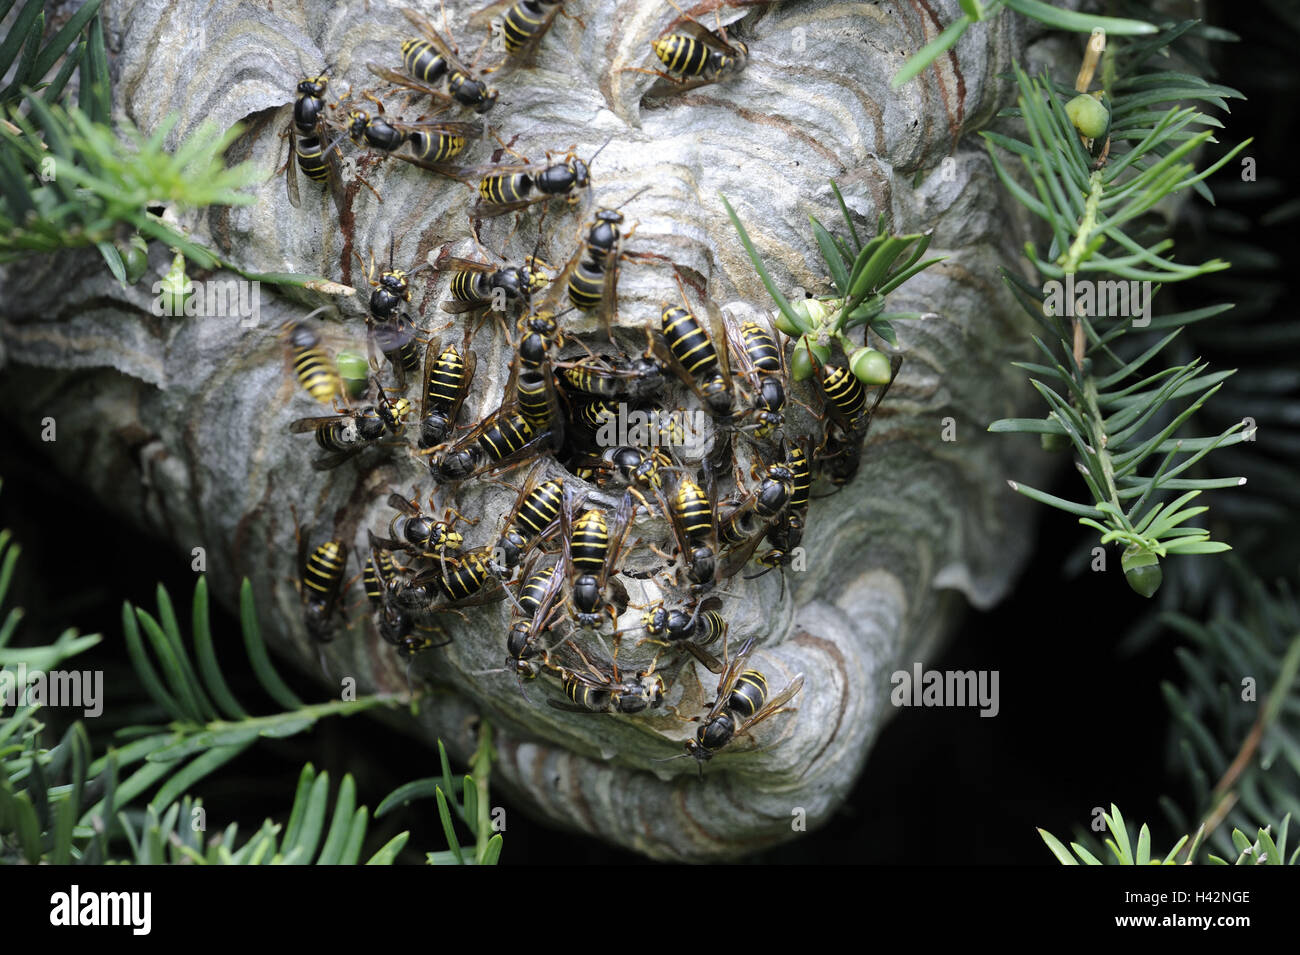 Middle wasps, Dolichovespula media, wasps' nest, animals, insects, wasp's floor, dream, pleated wasps, wasp's floor, nest, many, Stock Photo